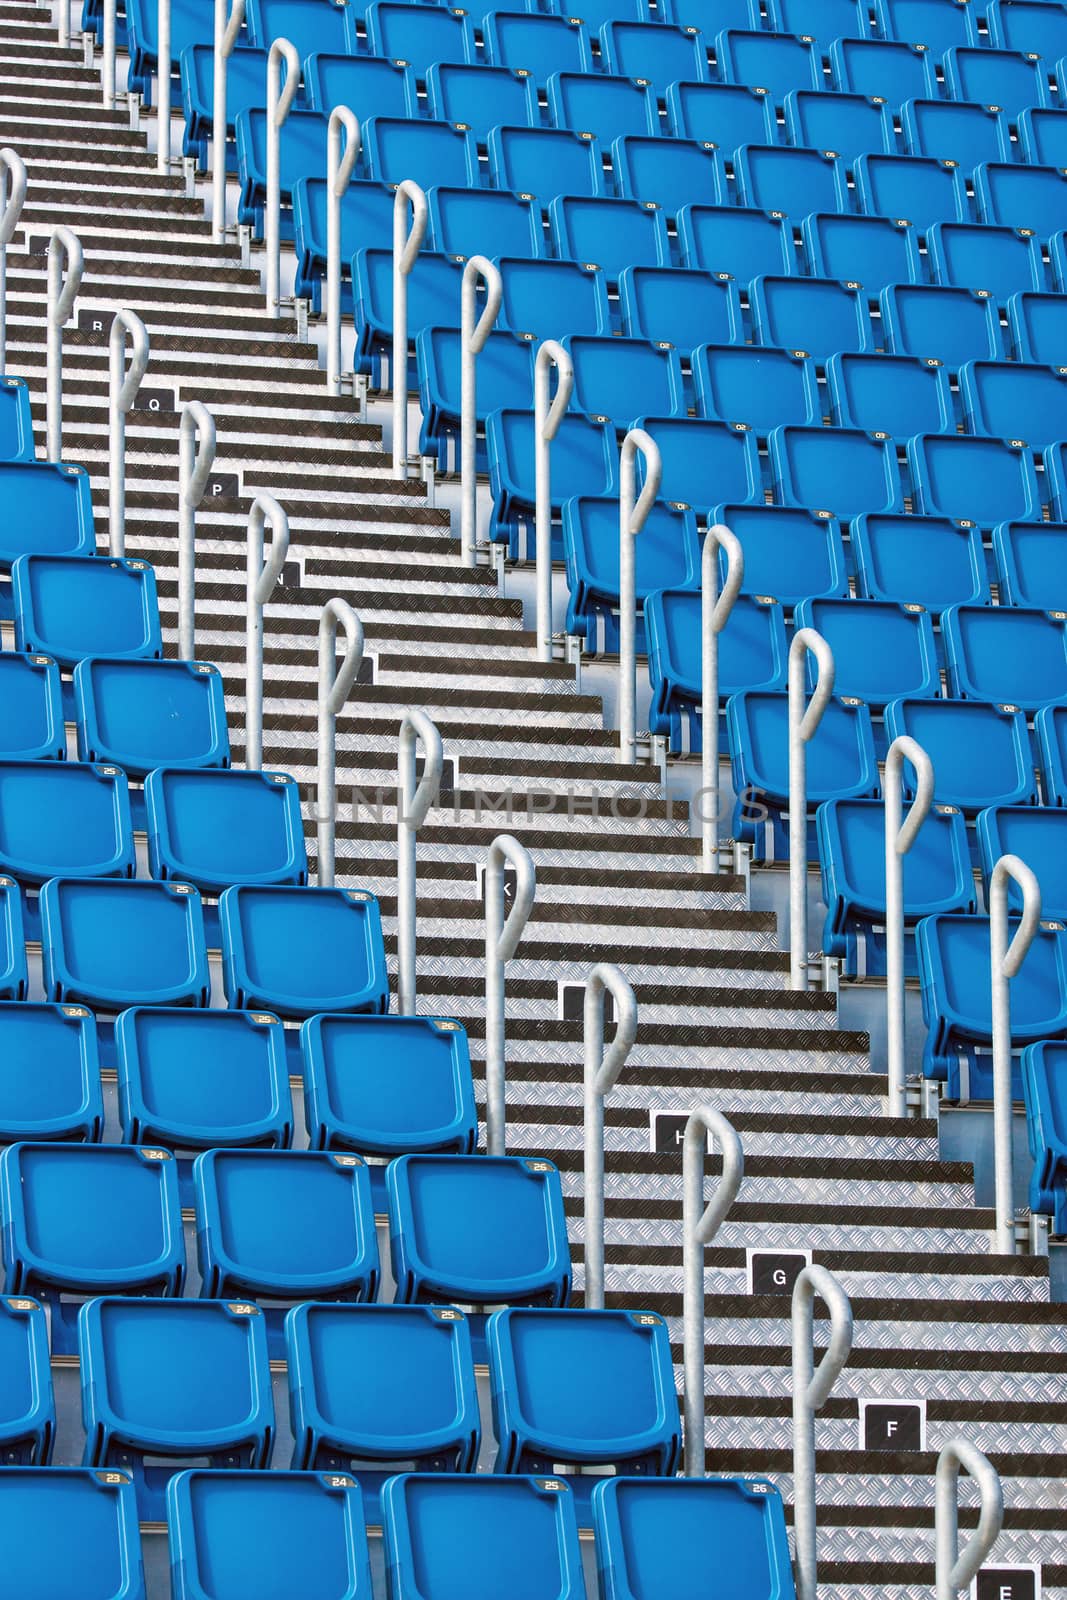 Blue stadium seats and a metallic staircase